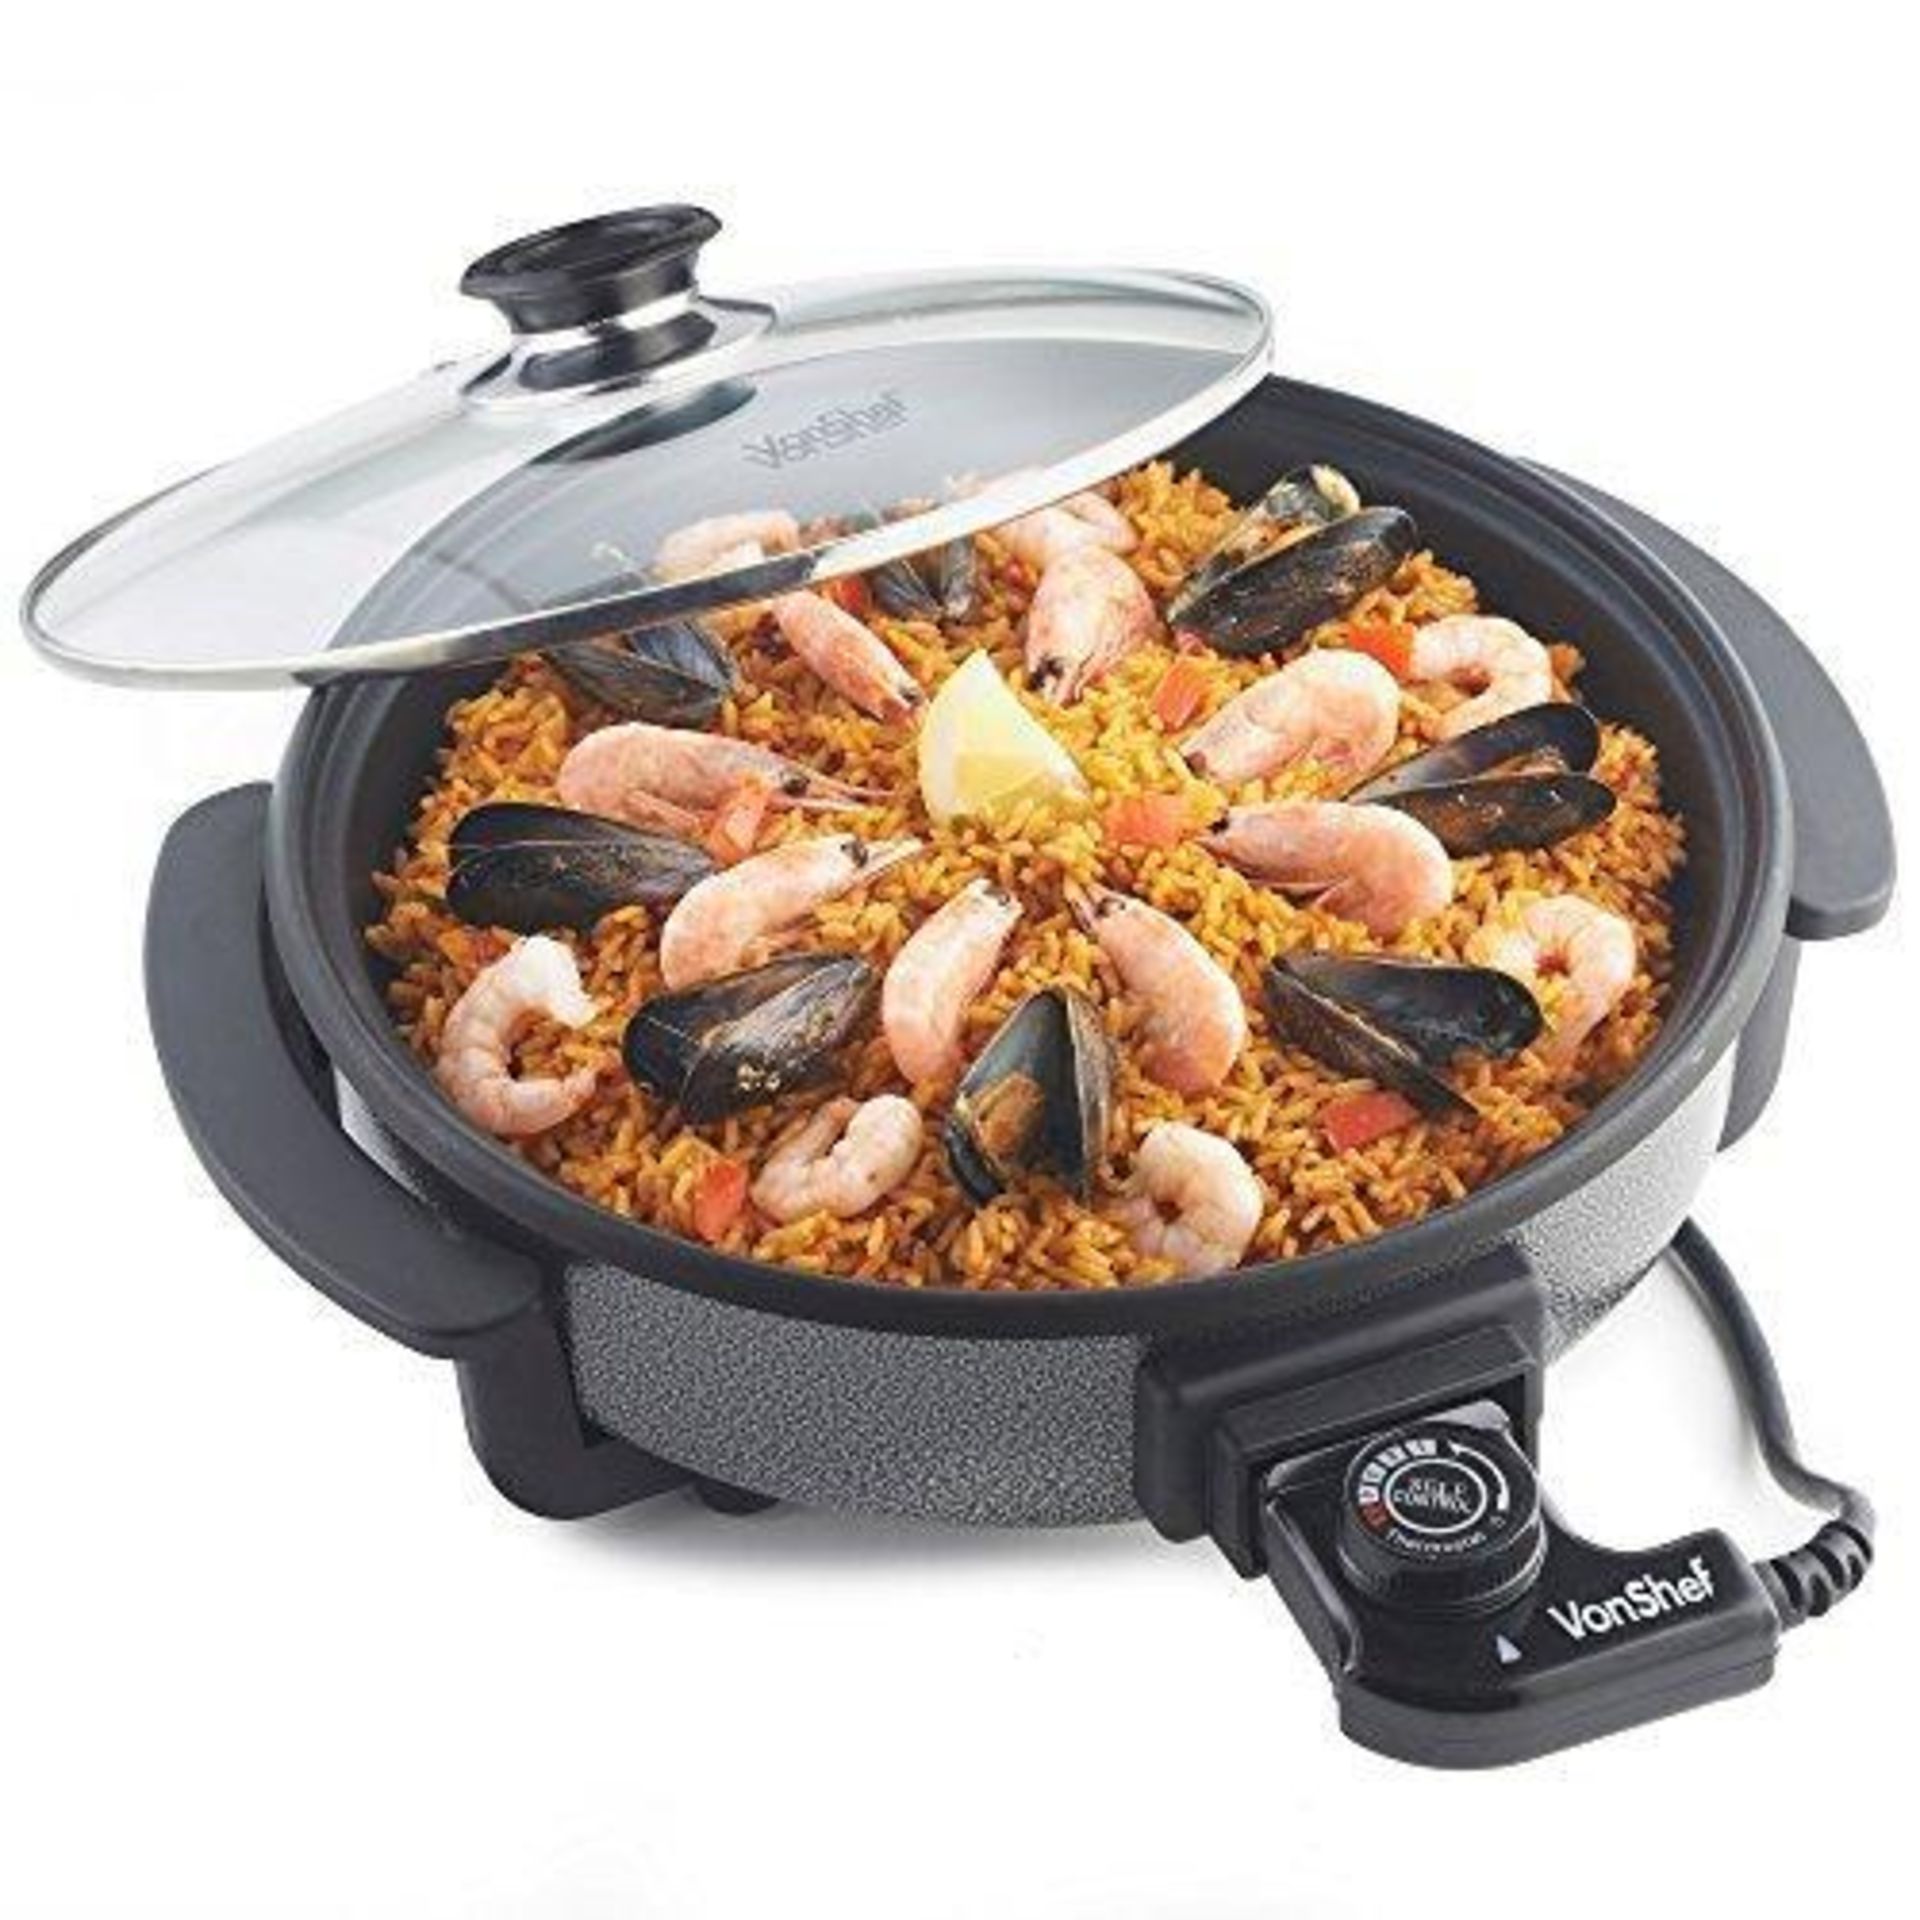 30cm Round Multi Cooker 30cm Round Multi CookerPrepare delicious dishes wherever you go with this